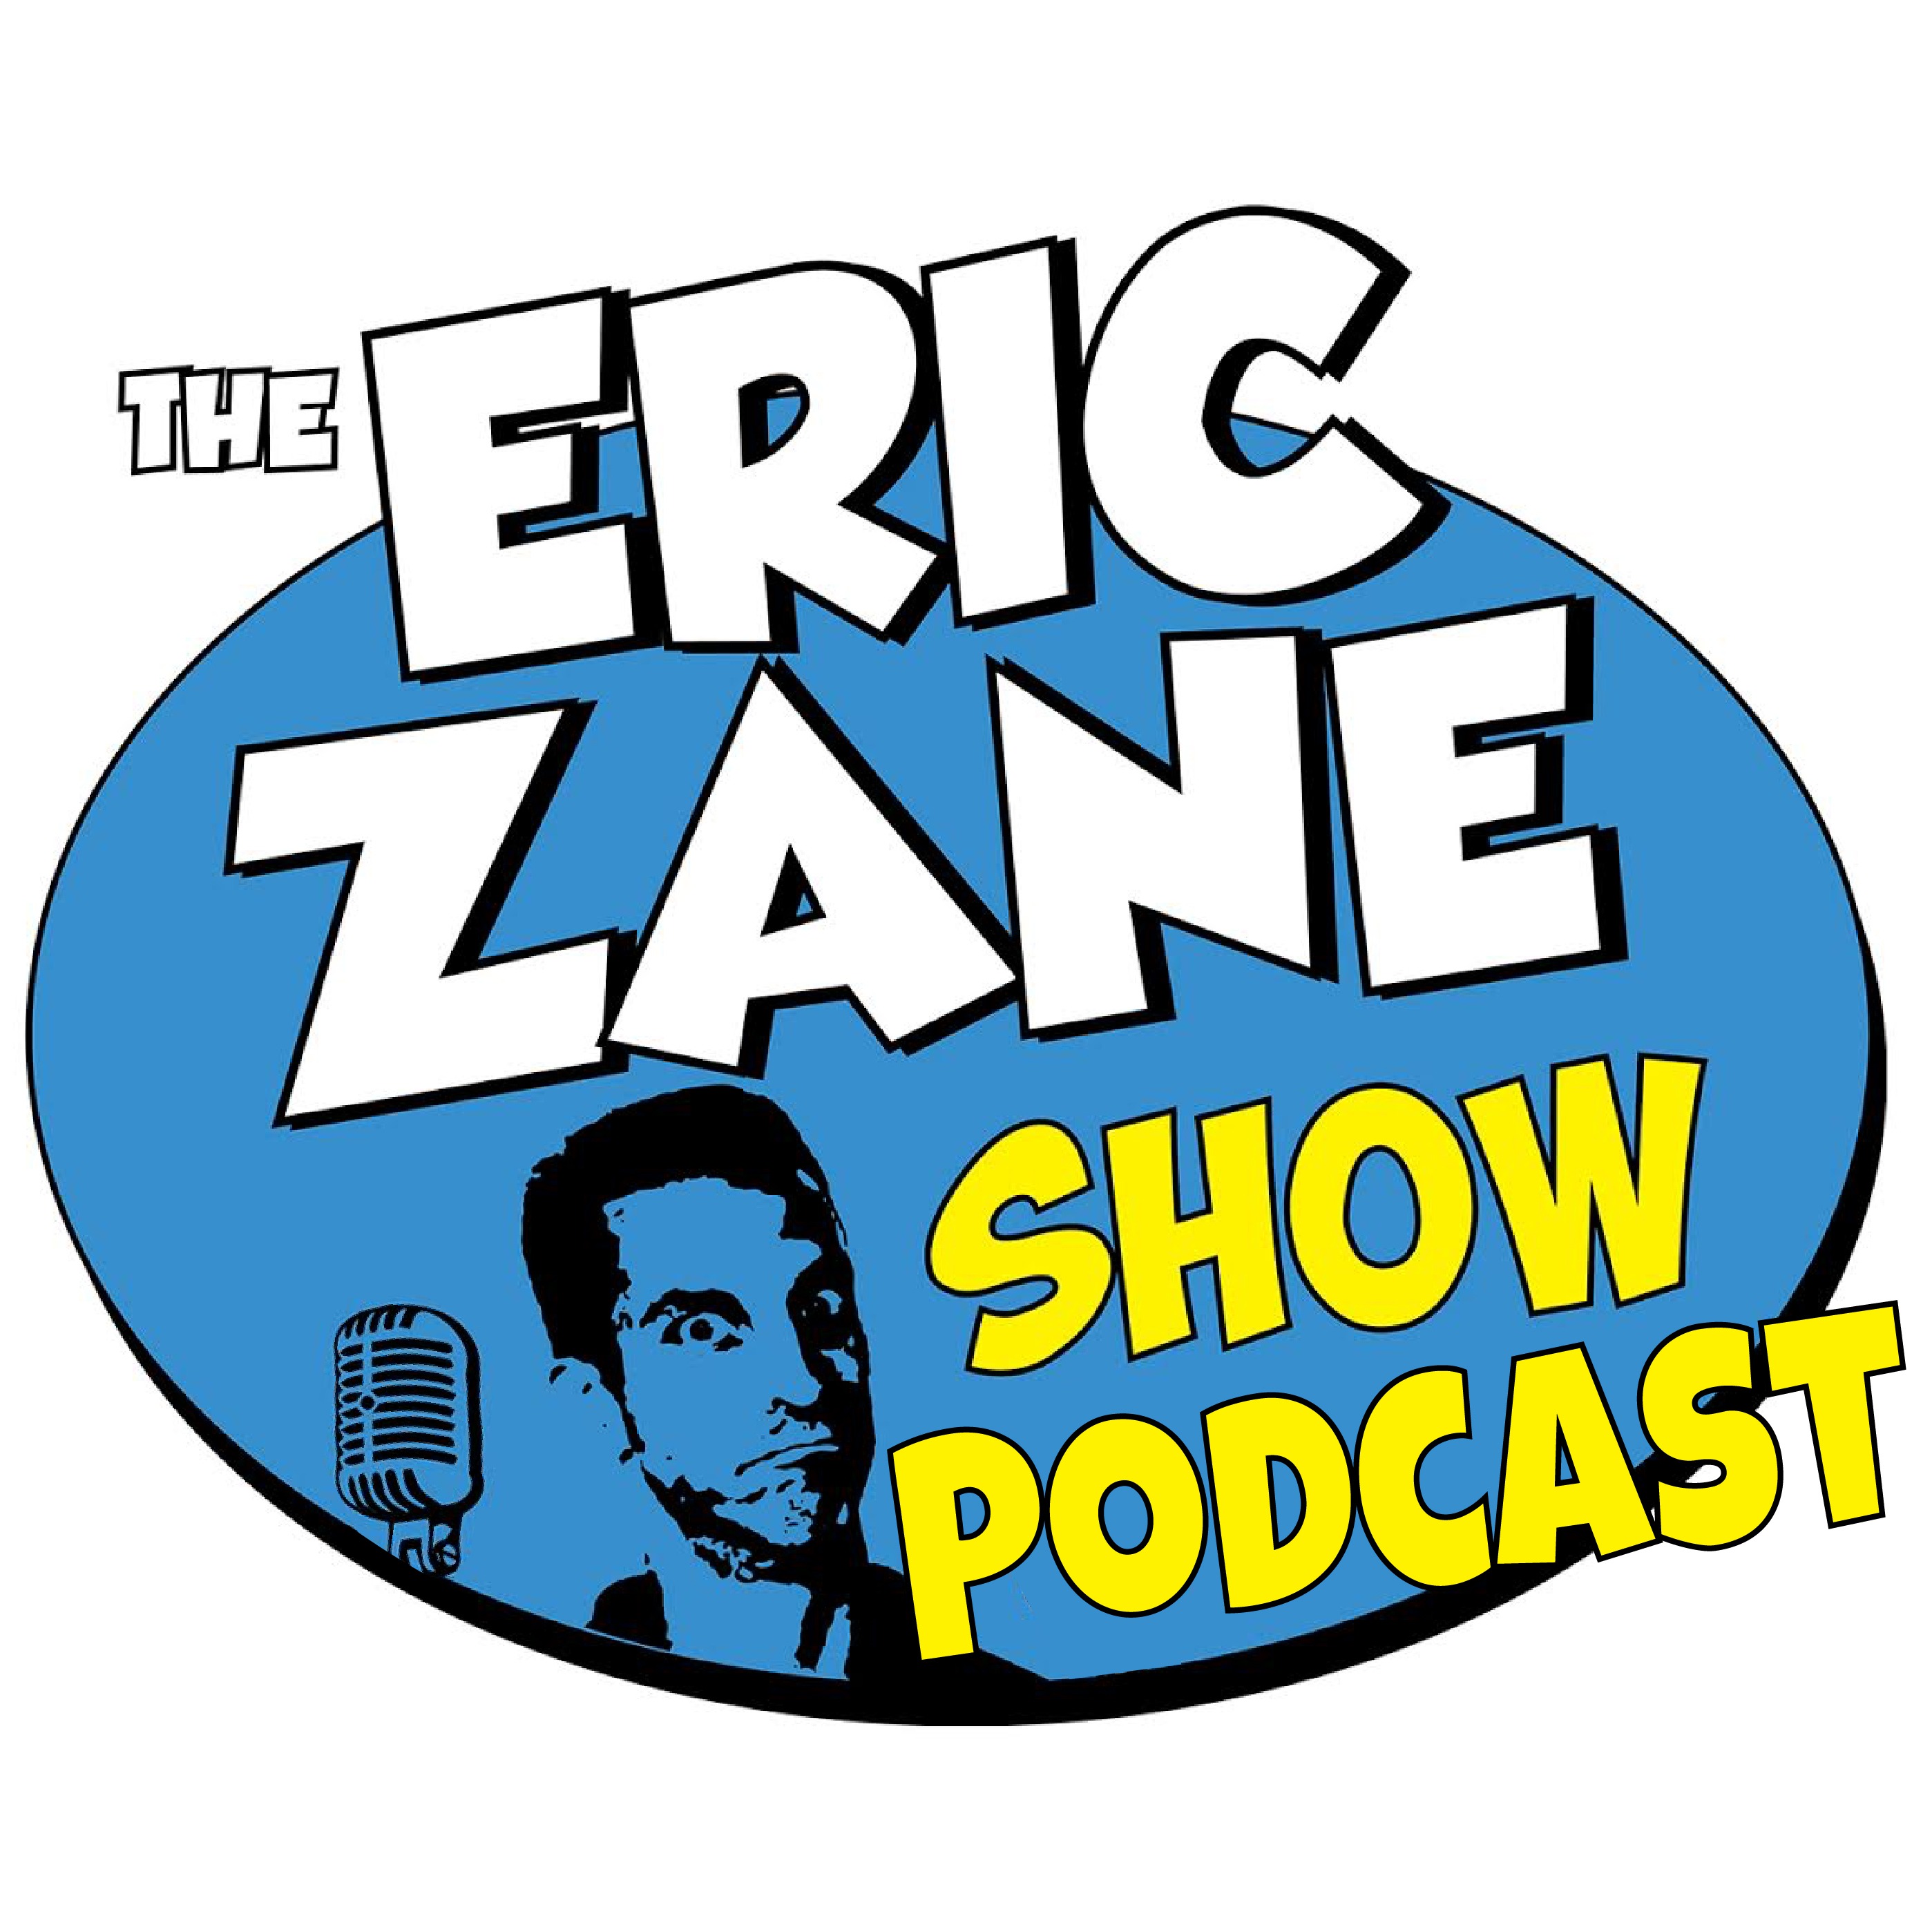 Eric Zane Show Podcast 940 - The most ridiculous, disturbing personal story I've ever told